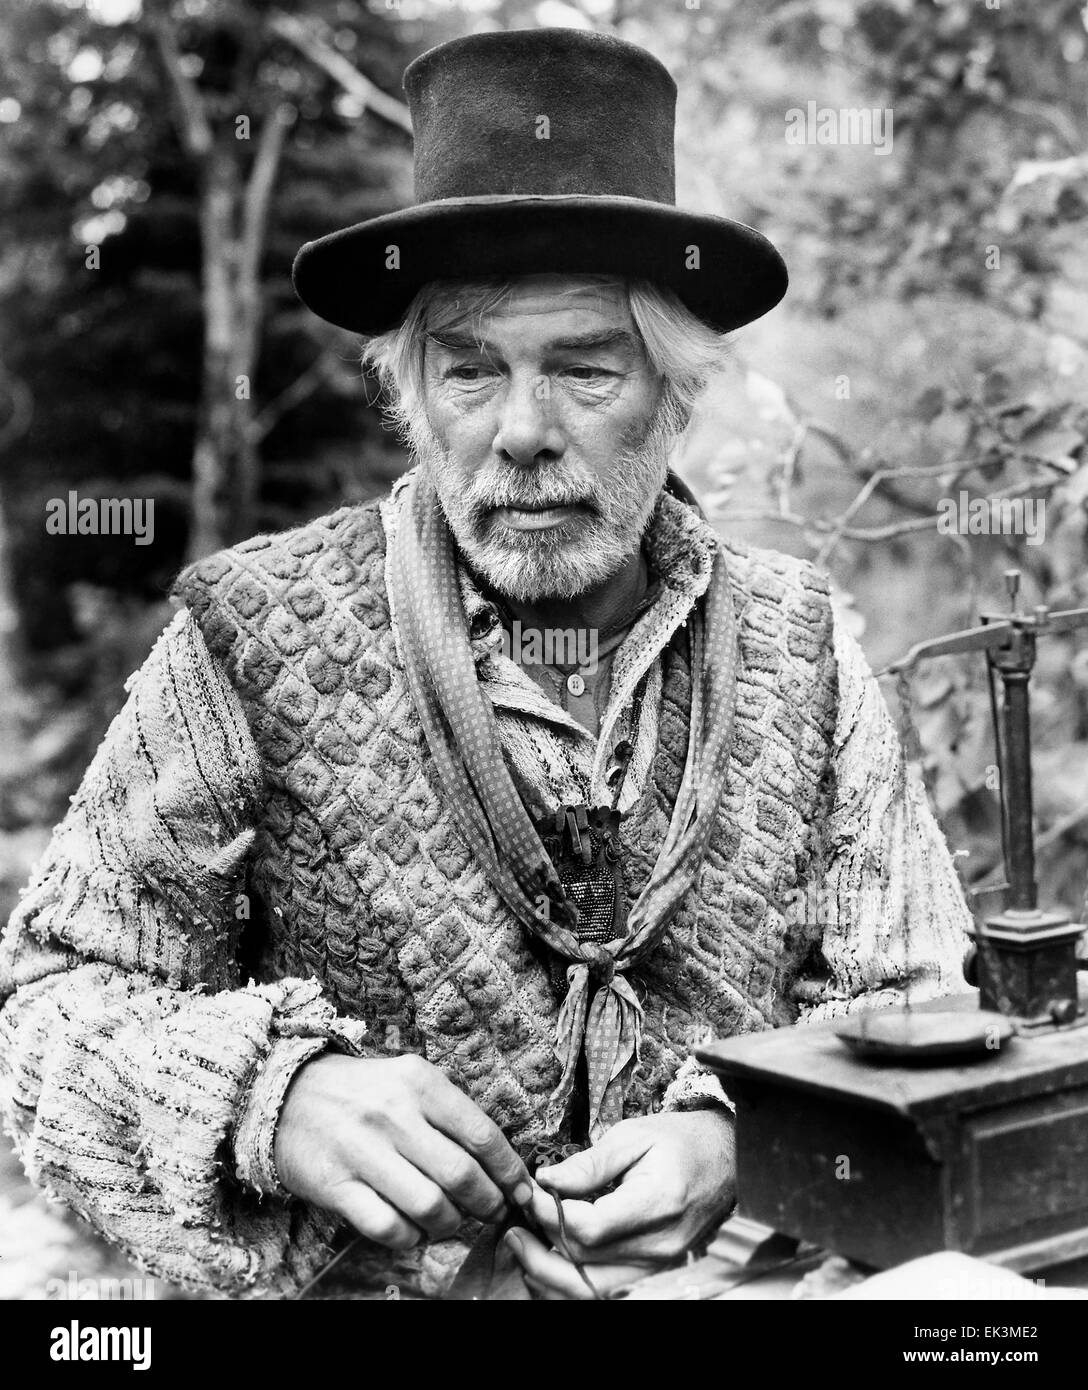 Lee marvin Black and White Stock Photos & Images - Alamy